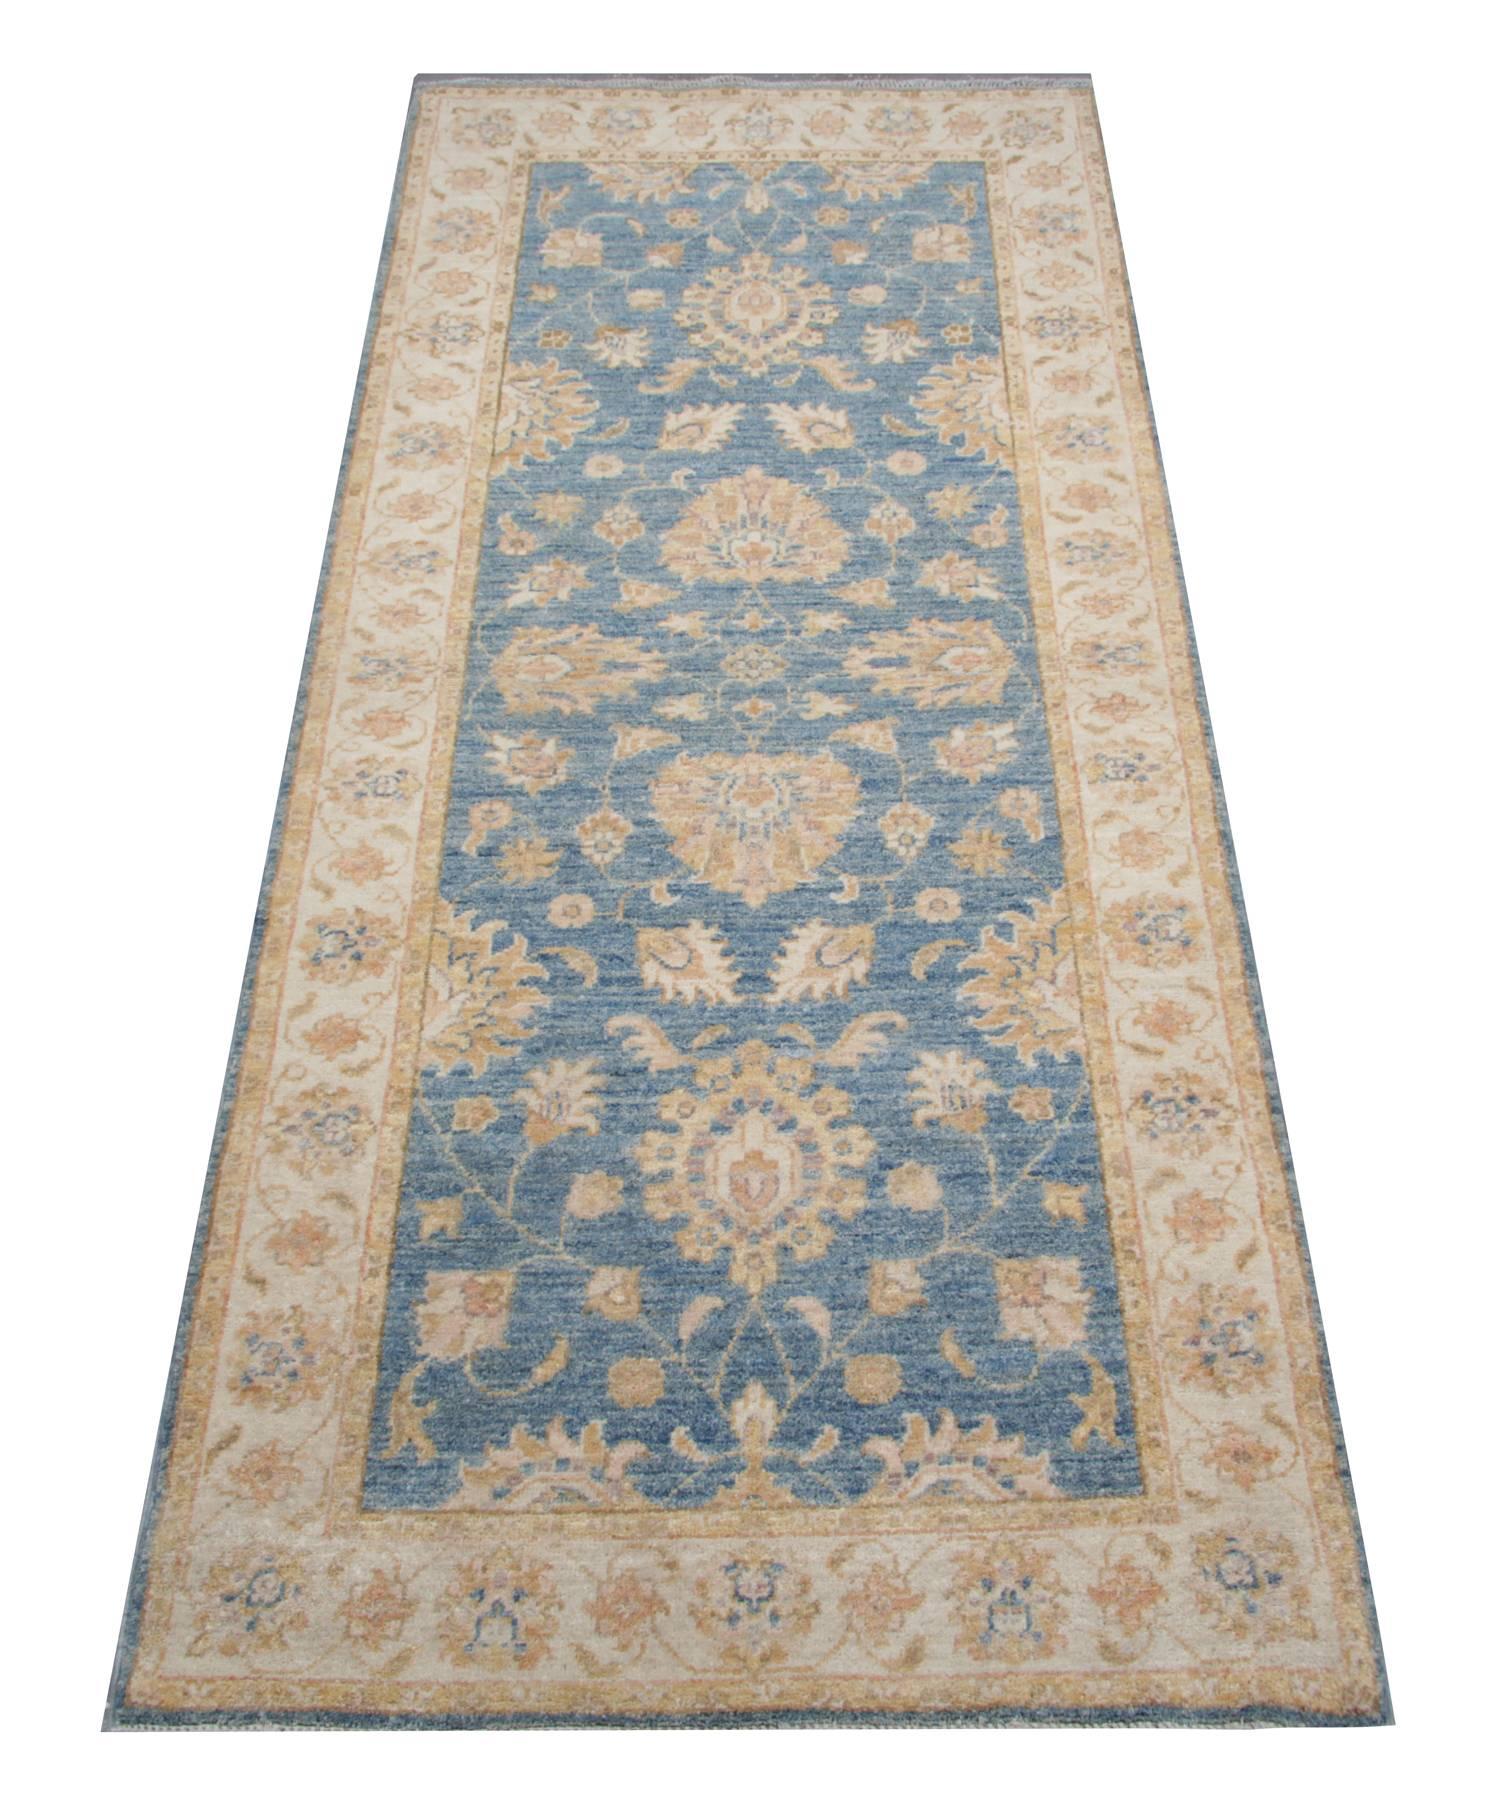 This kind rugs and runners are in the same style of Ziegler Sultanabad runner made on our own looms by our master weavers in Afghanistan, this blue rug runner is made with all-natural vegetable dyes all handmade wool rugs. The large-scale